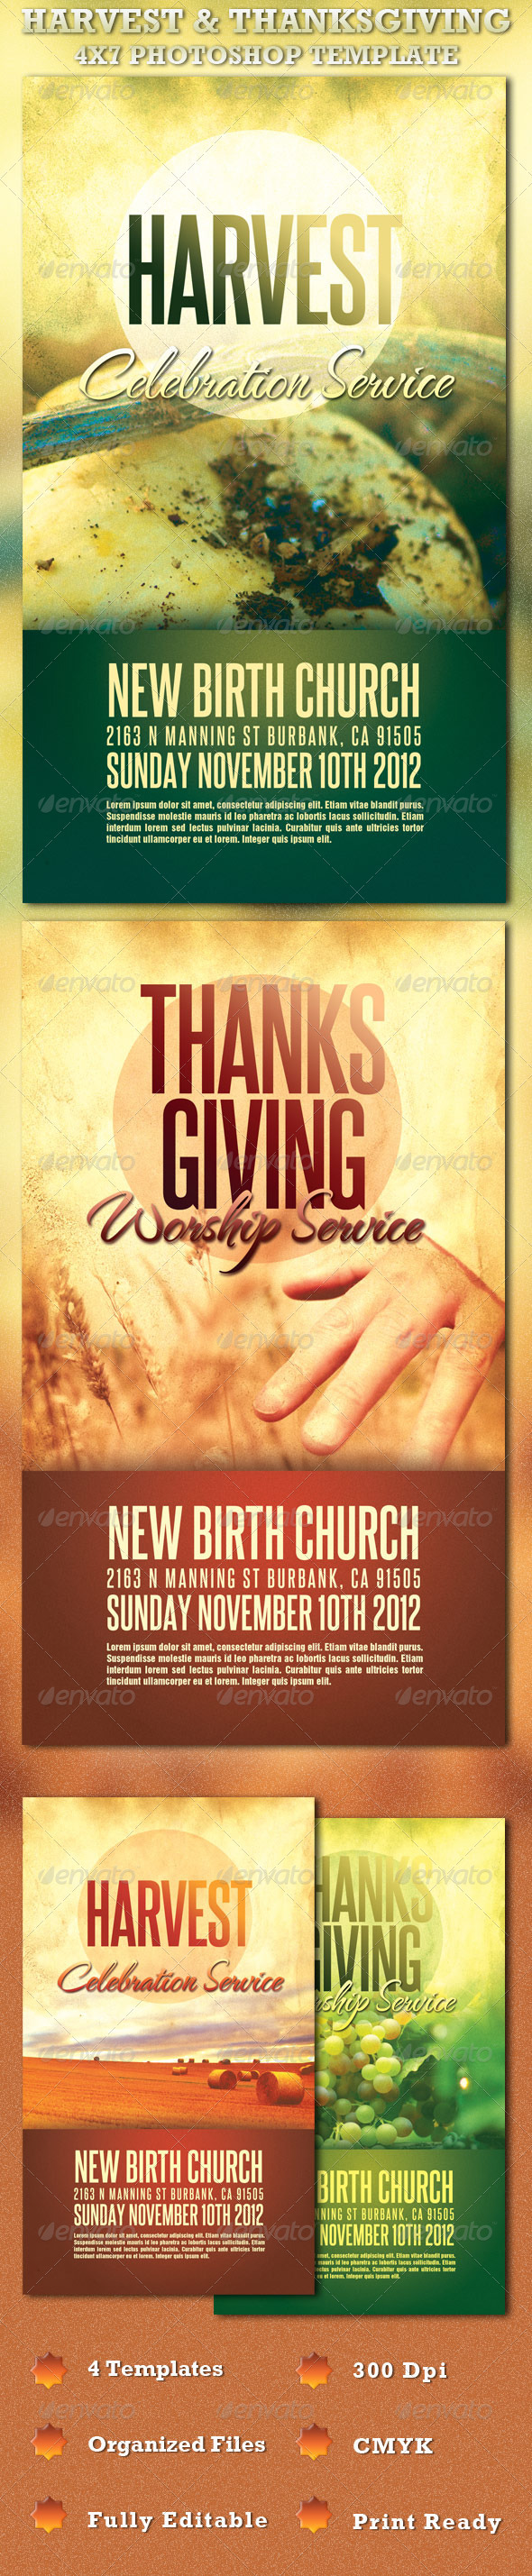 Harvest and Thanksgiving Church Flyer Template